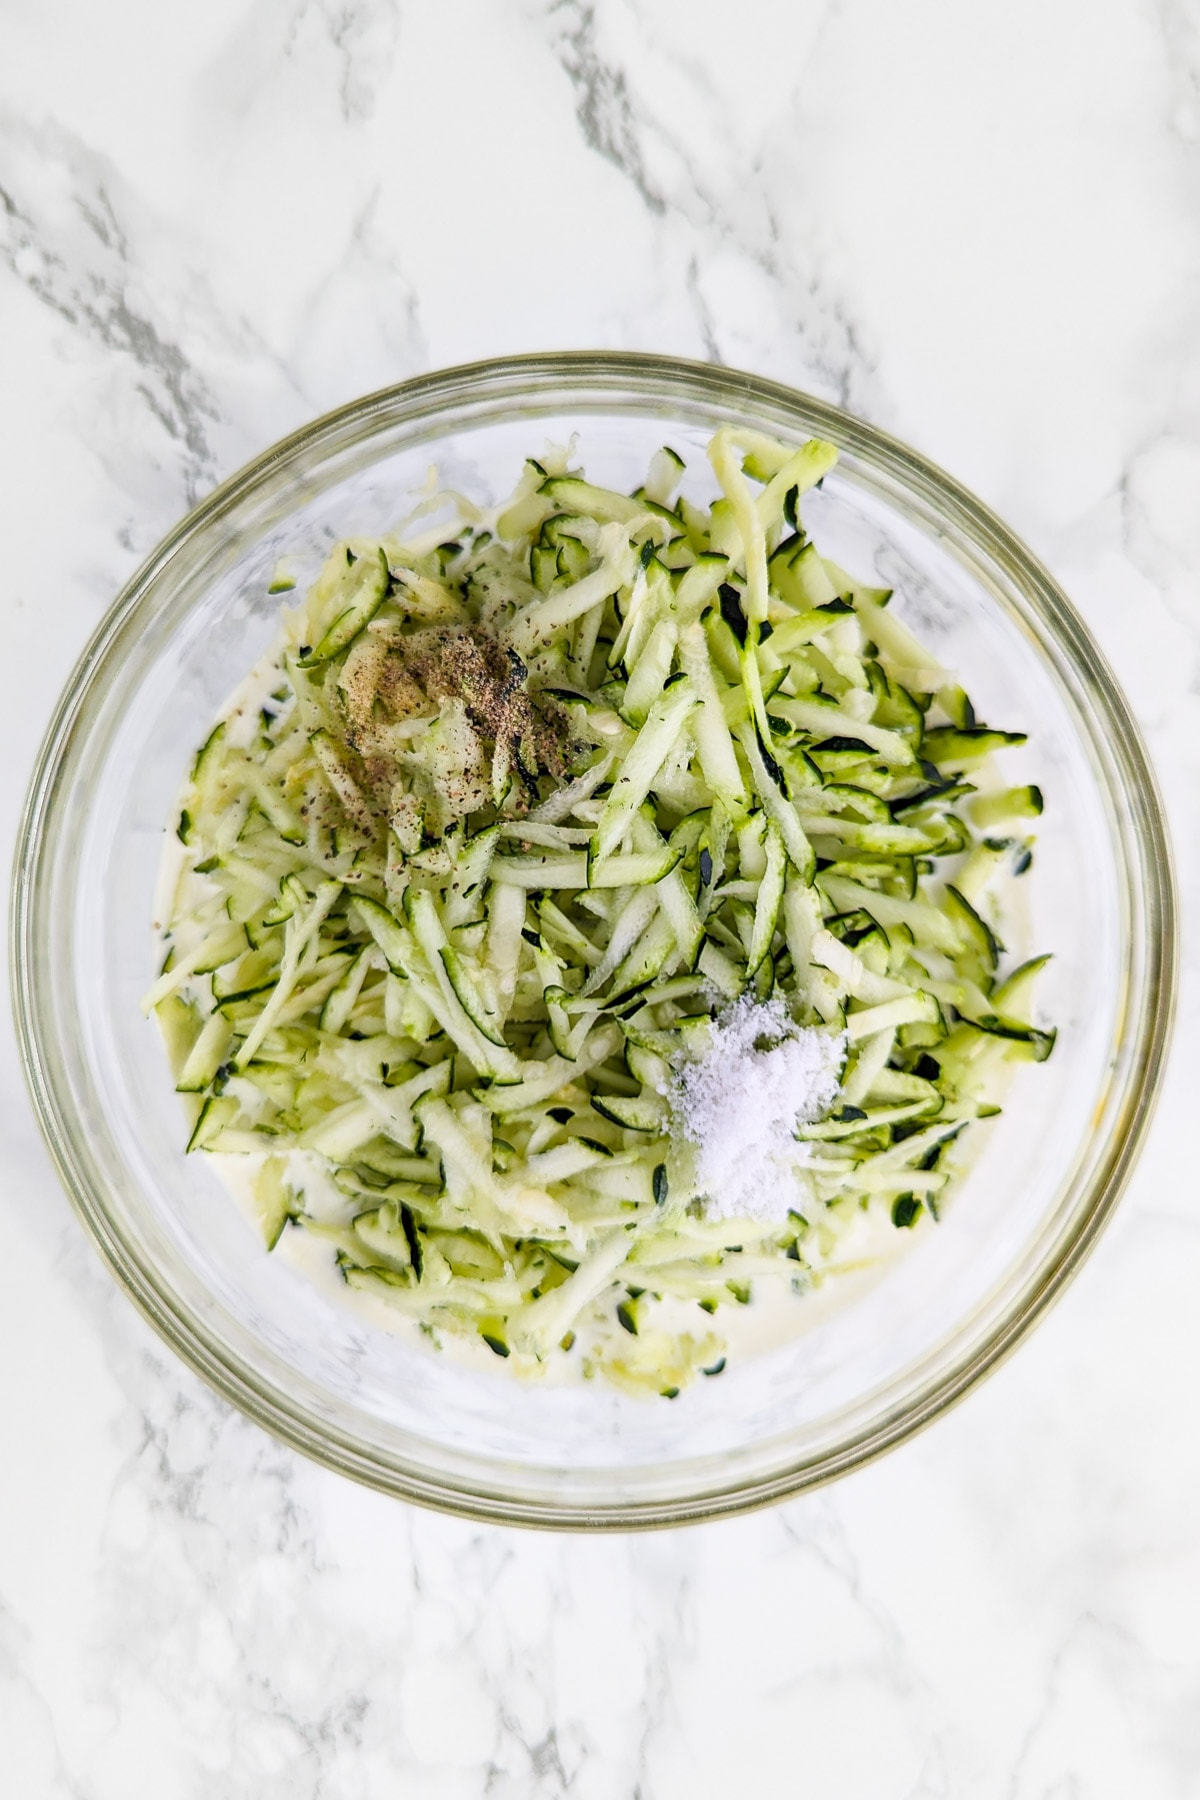 Shredded zucchini with salt and black pepper in a white transparent bowl.